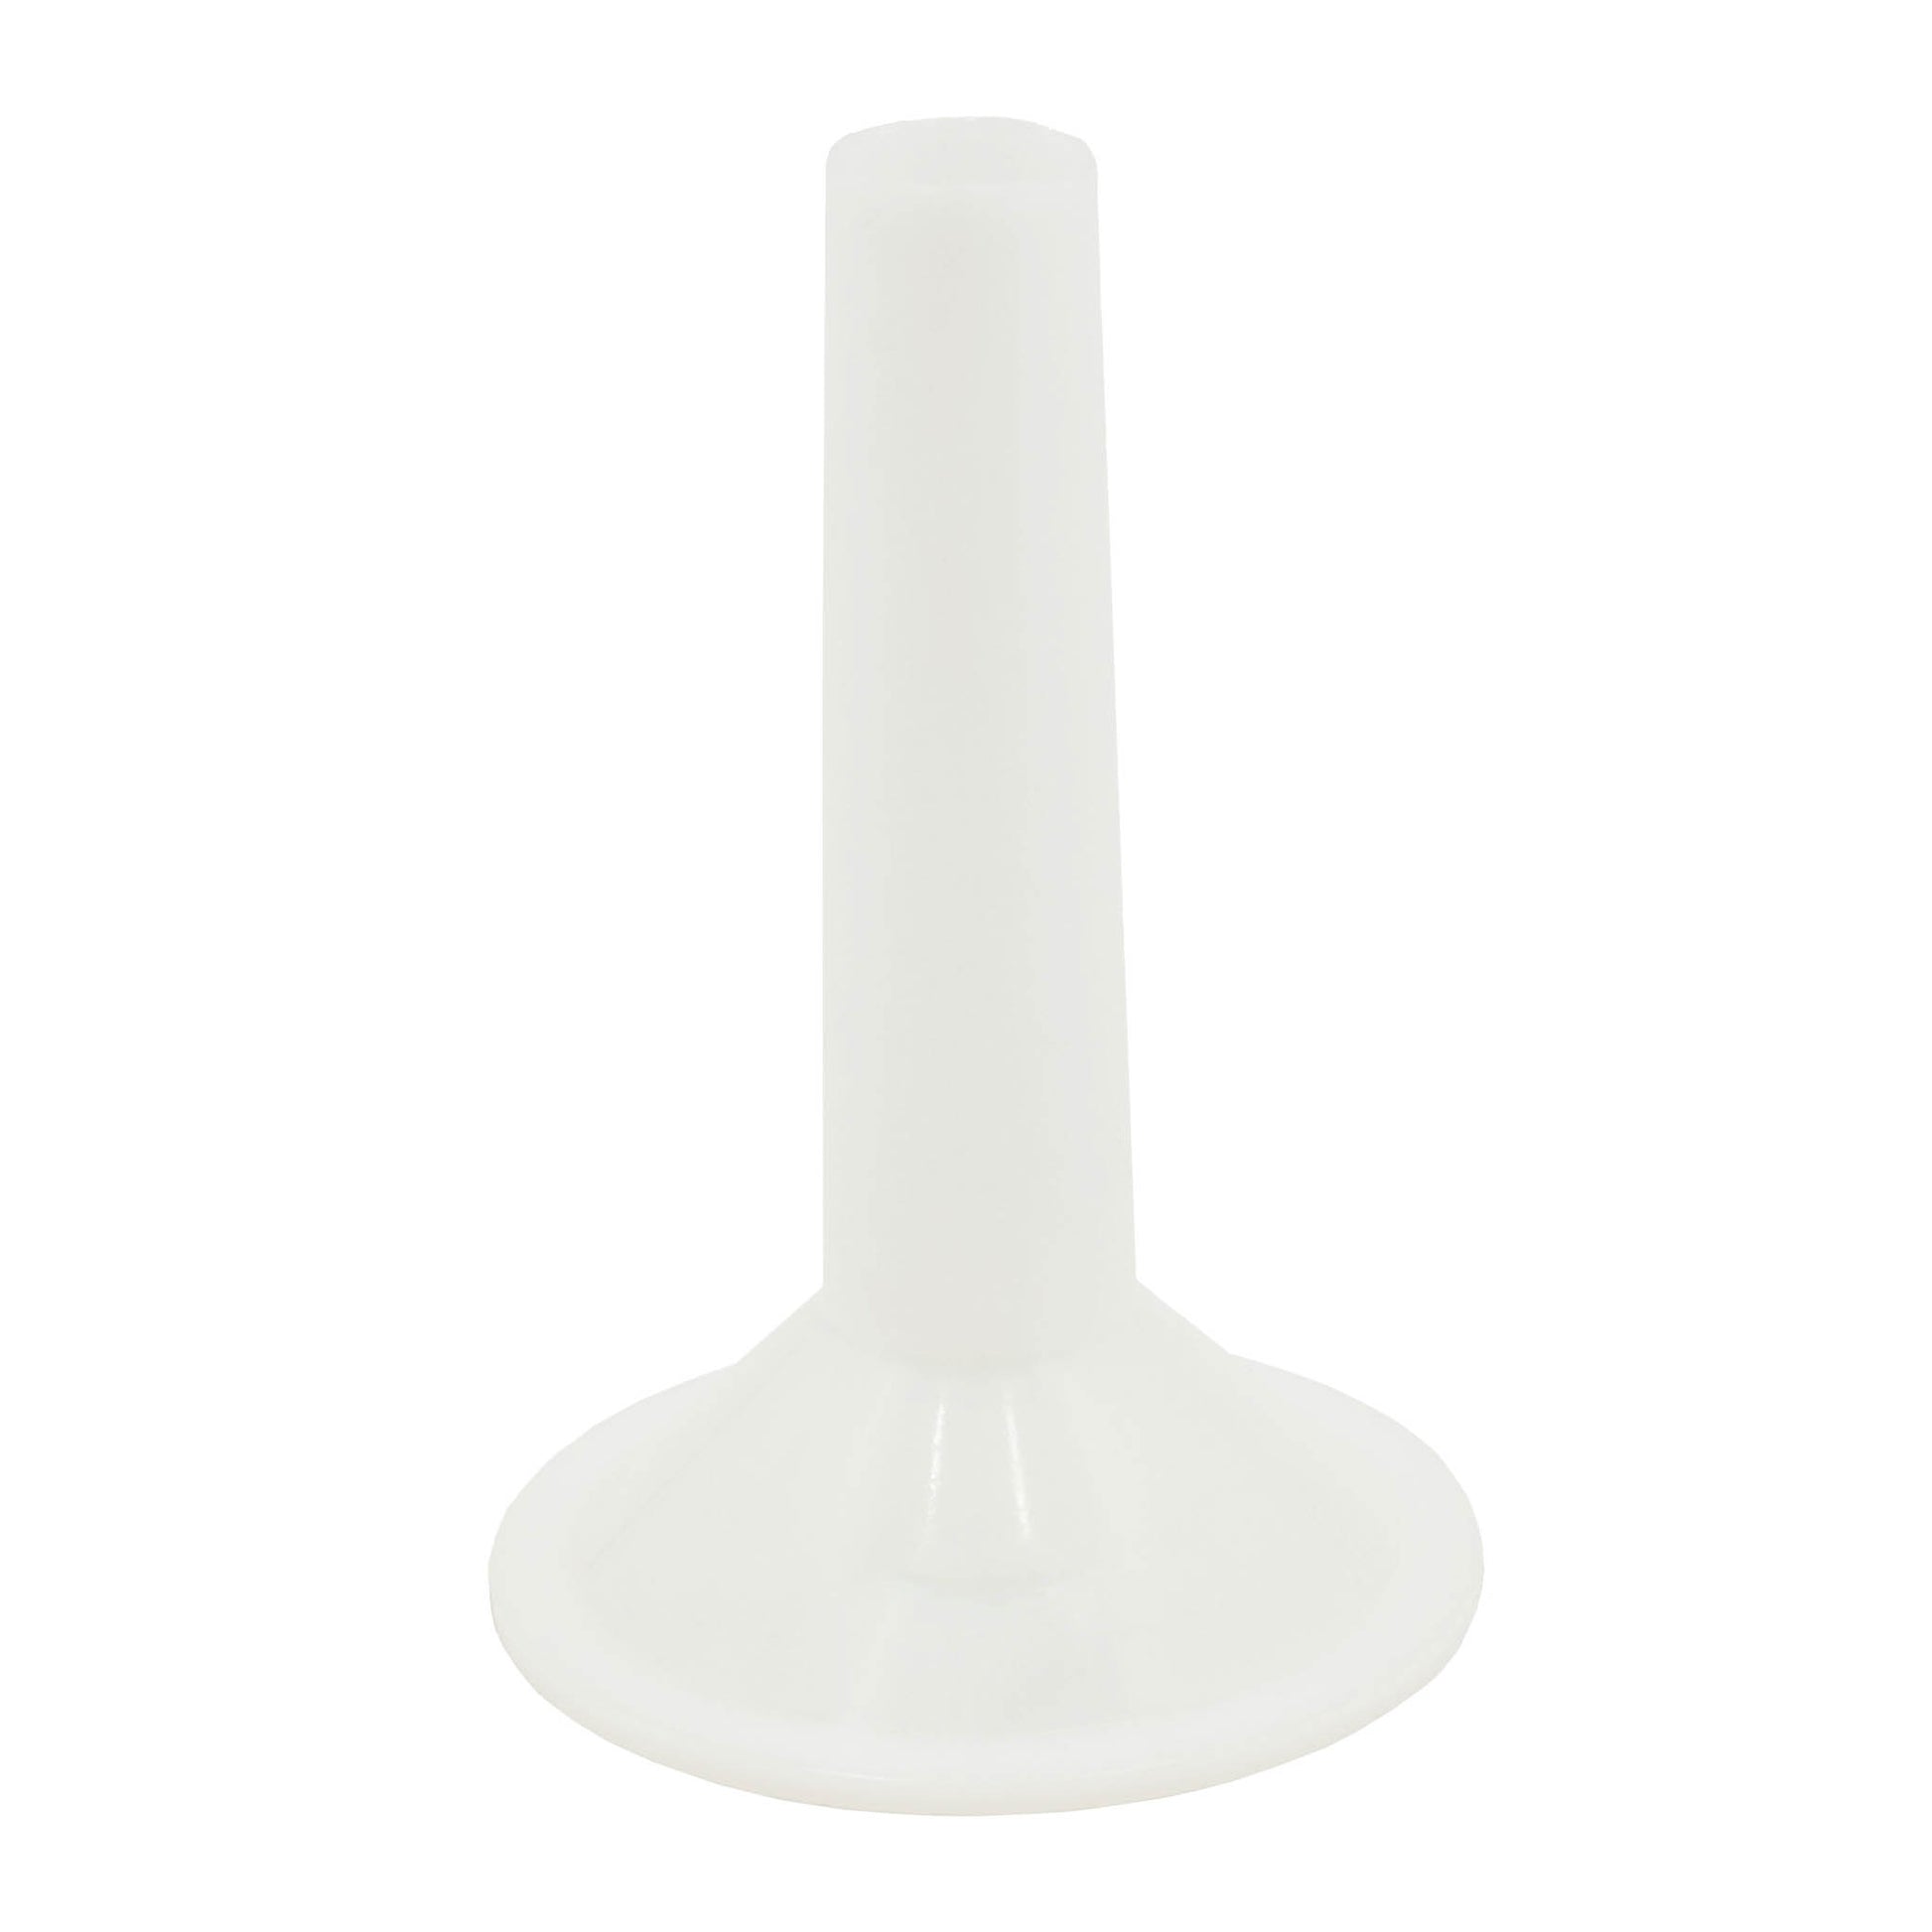 white food grade plastic salami and sausage mincer funnel for size 22 mincers 15mm in diameter. 